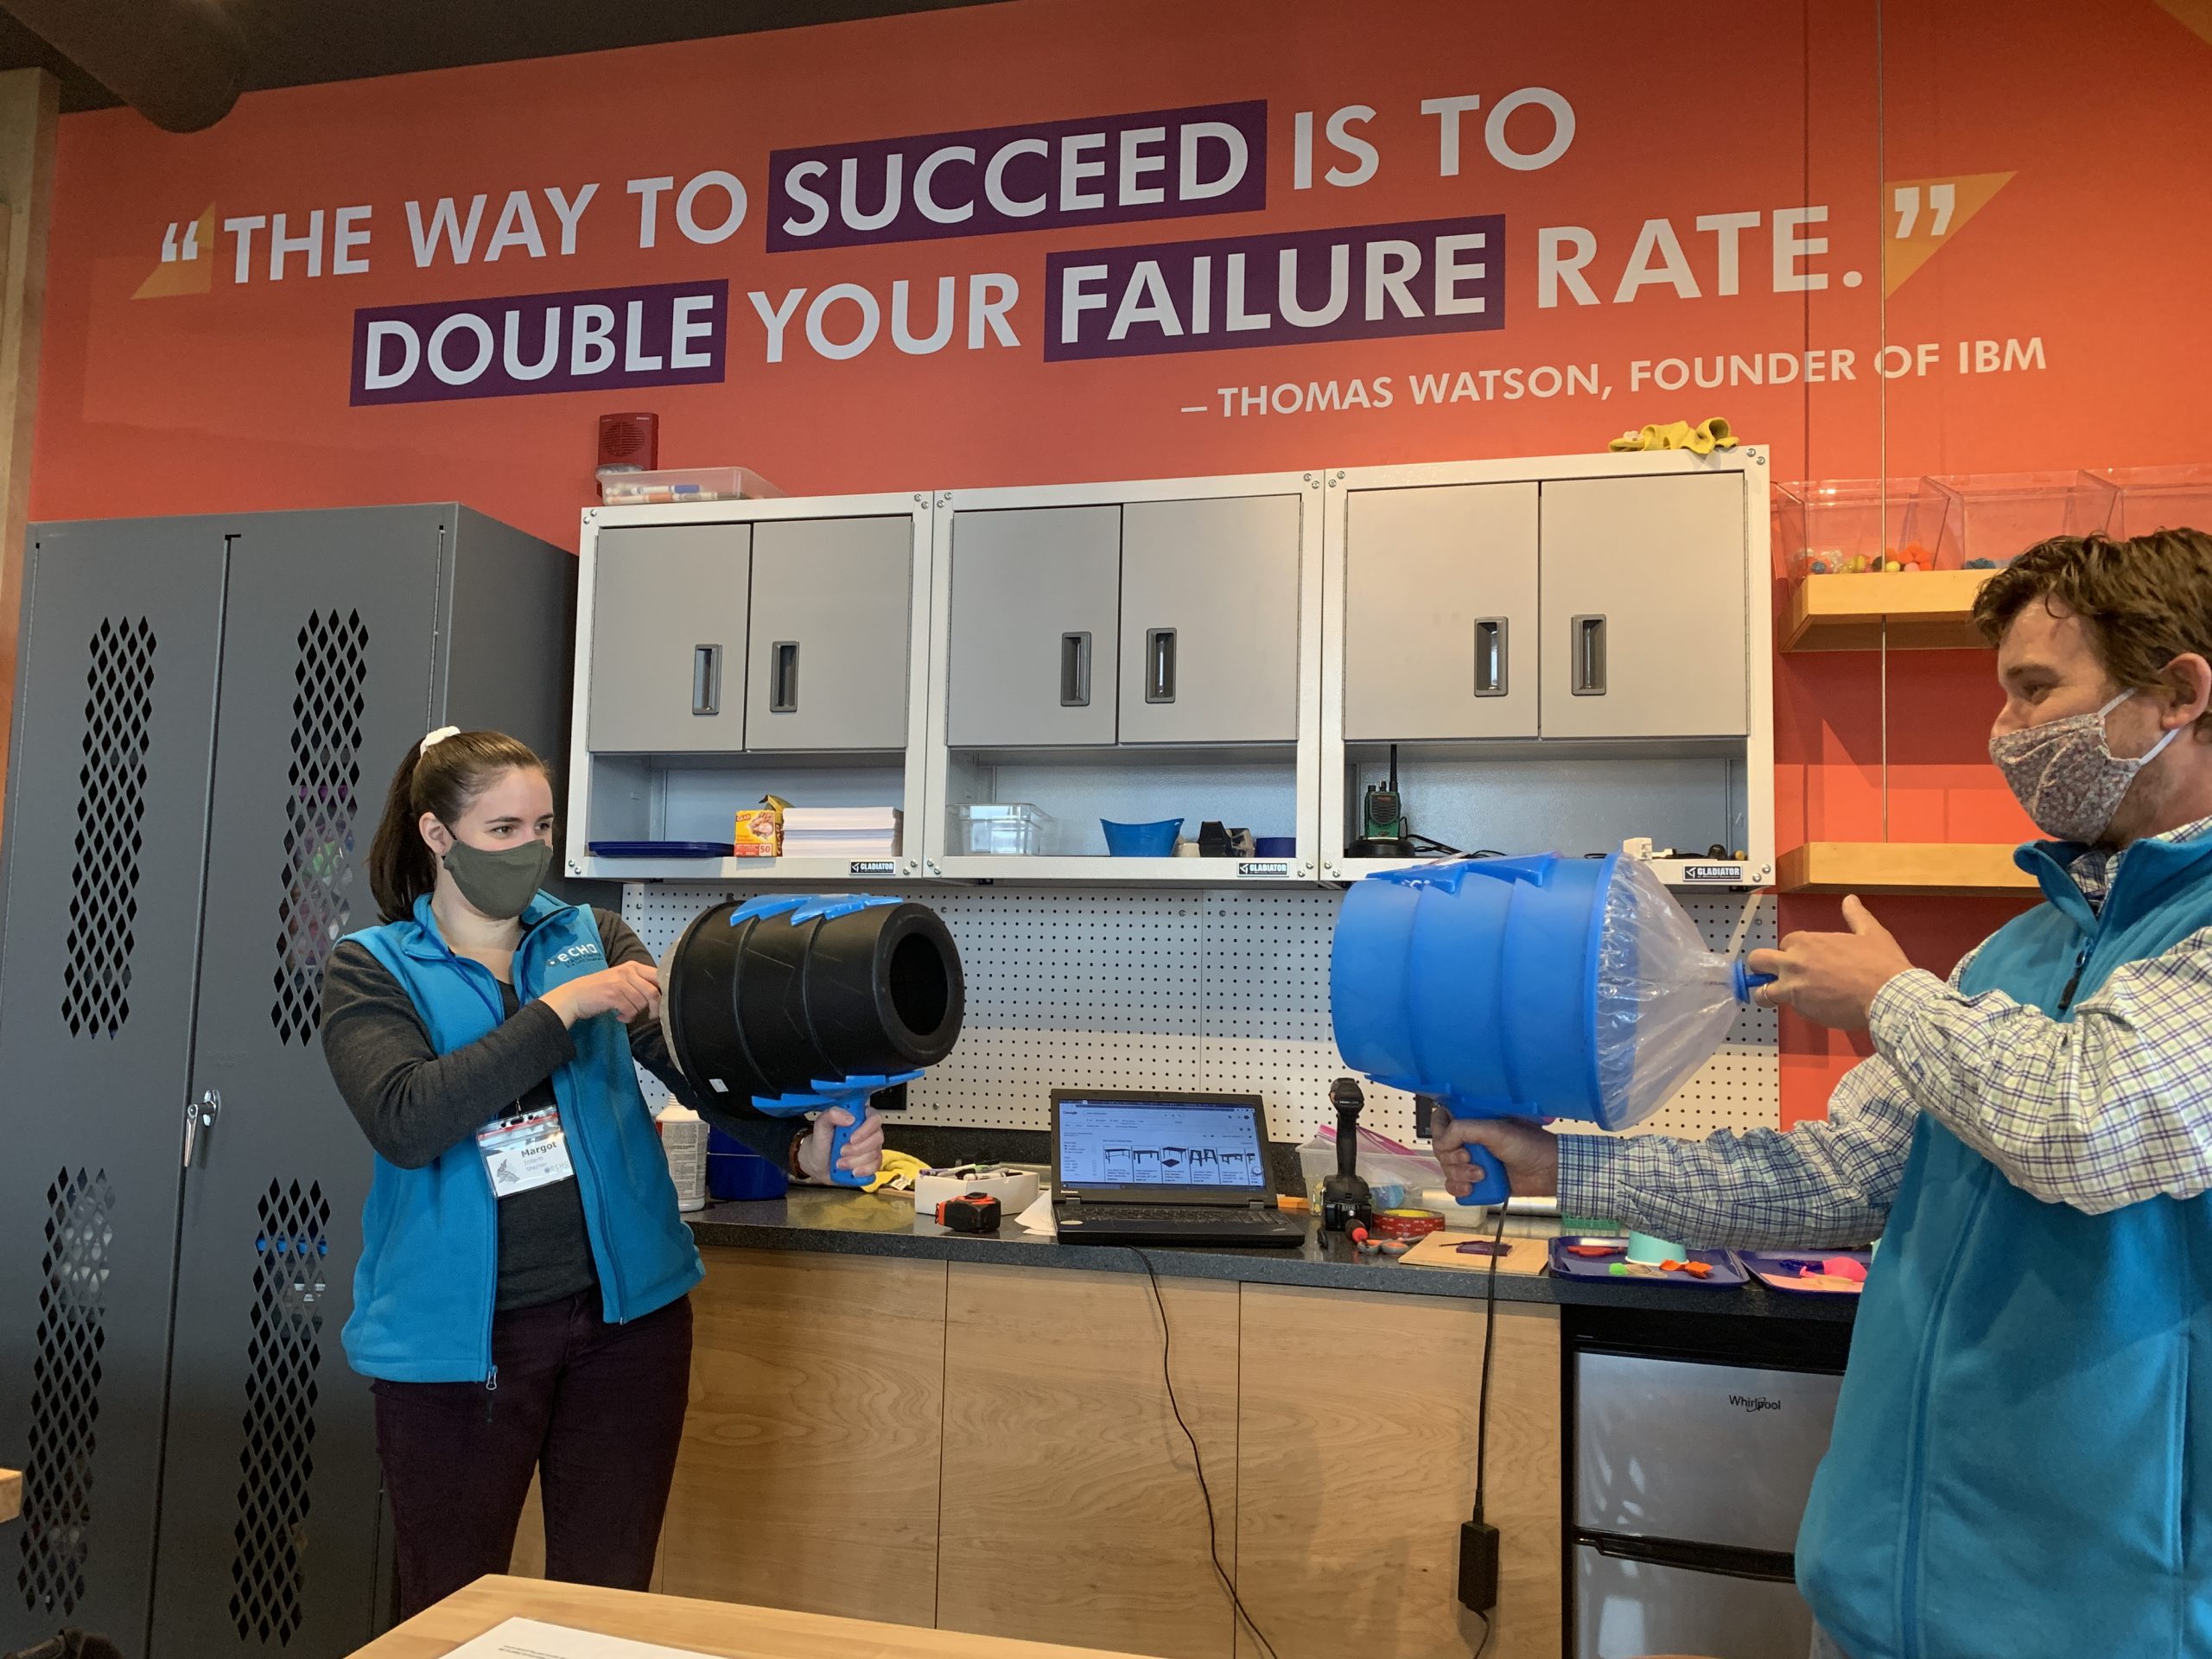 One female ECHO intern in a blue vest aiming an air cannon at a male ECHO educator in a blue vest with an air cannon ready to blow air at the intern. Both people are in front of an orange wall and white cabinets in the Engineer It space.